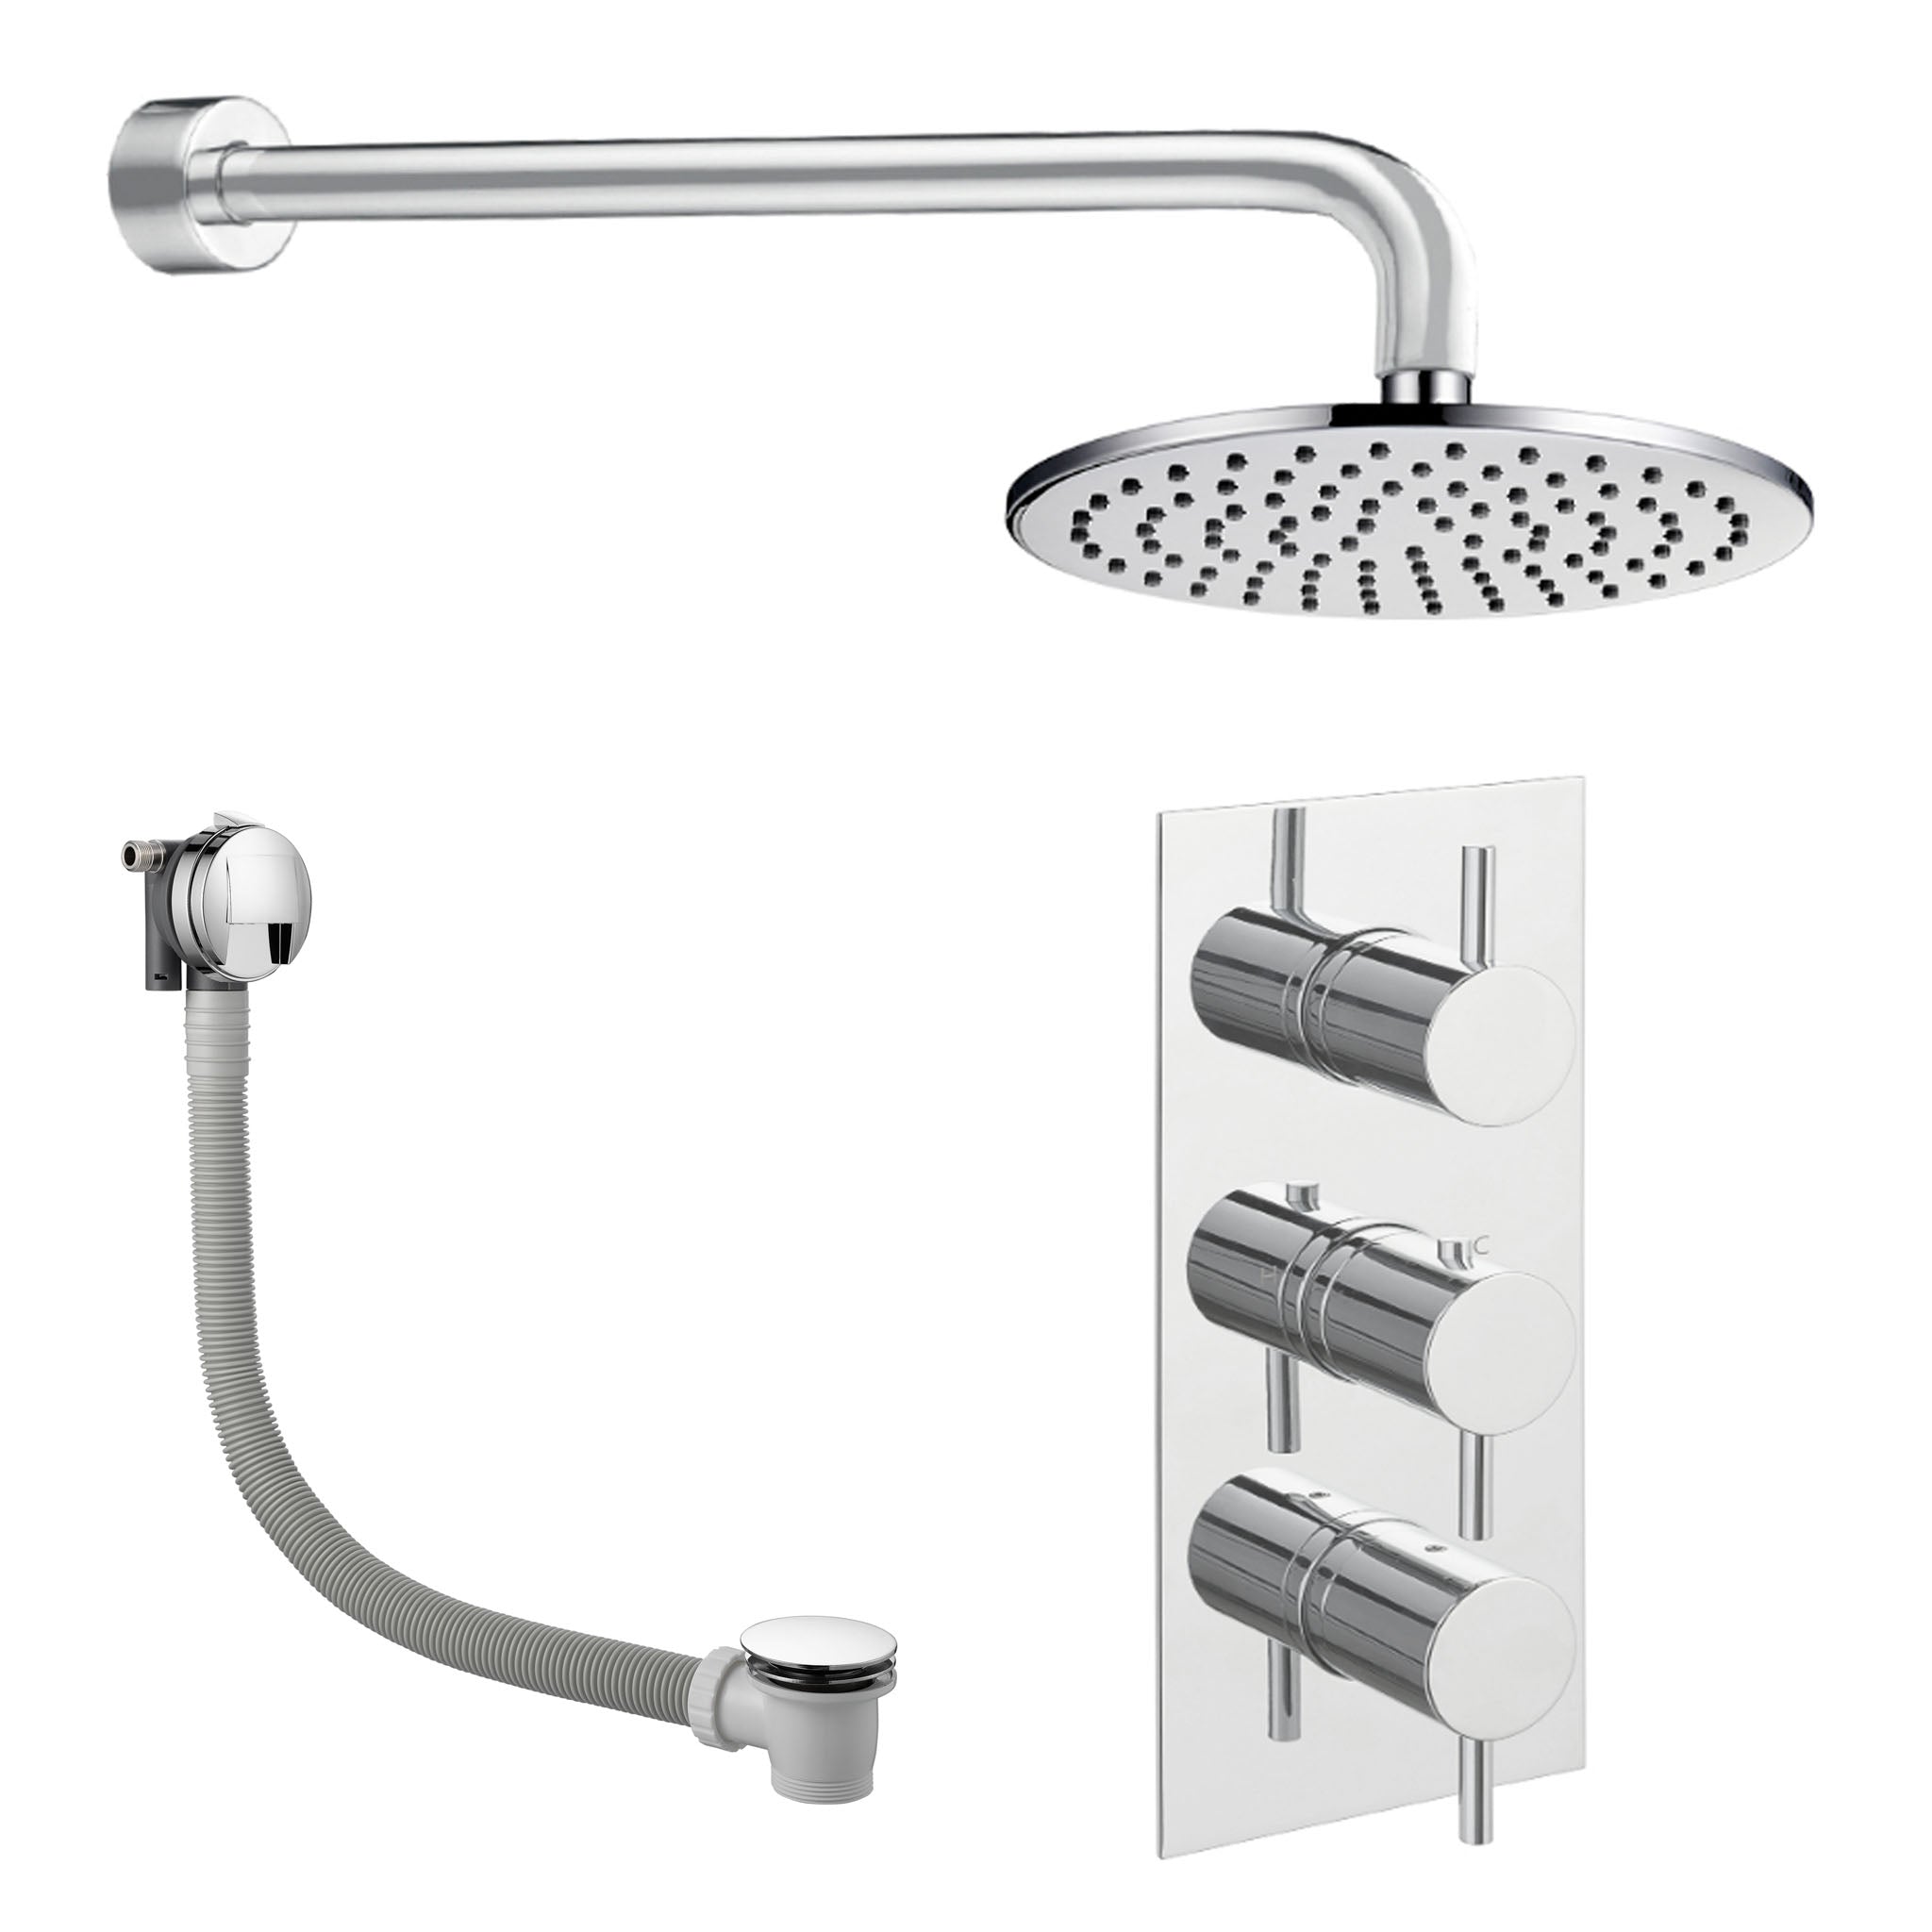 JTP Florence Round Thermostatic Shower Valve With Hand Shower & Bath Filler